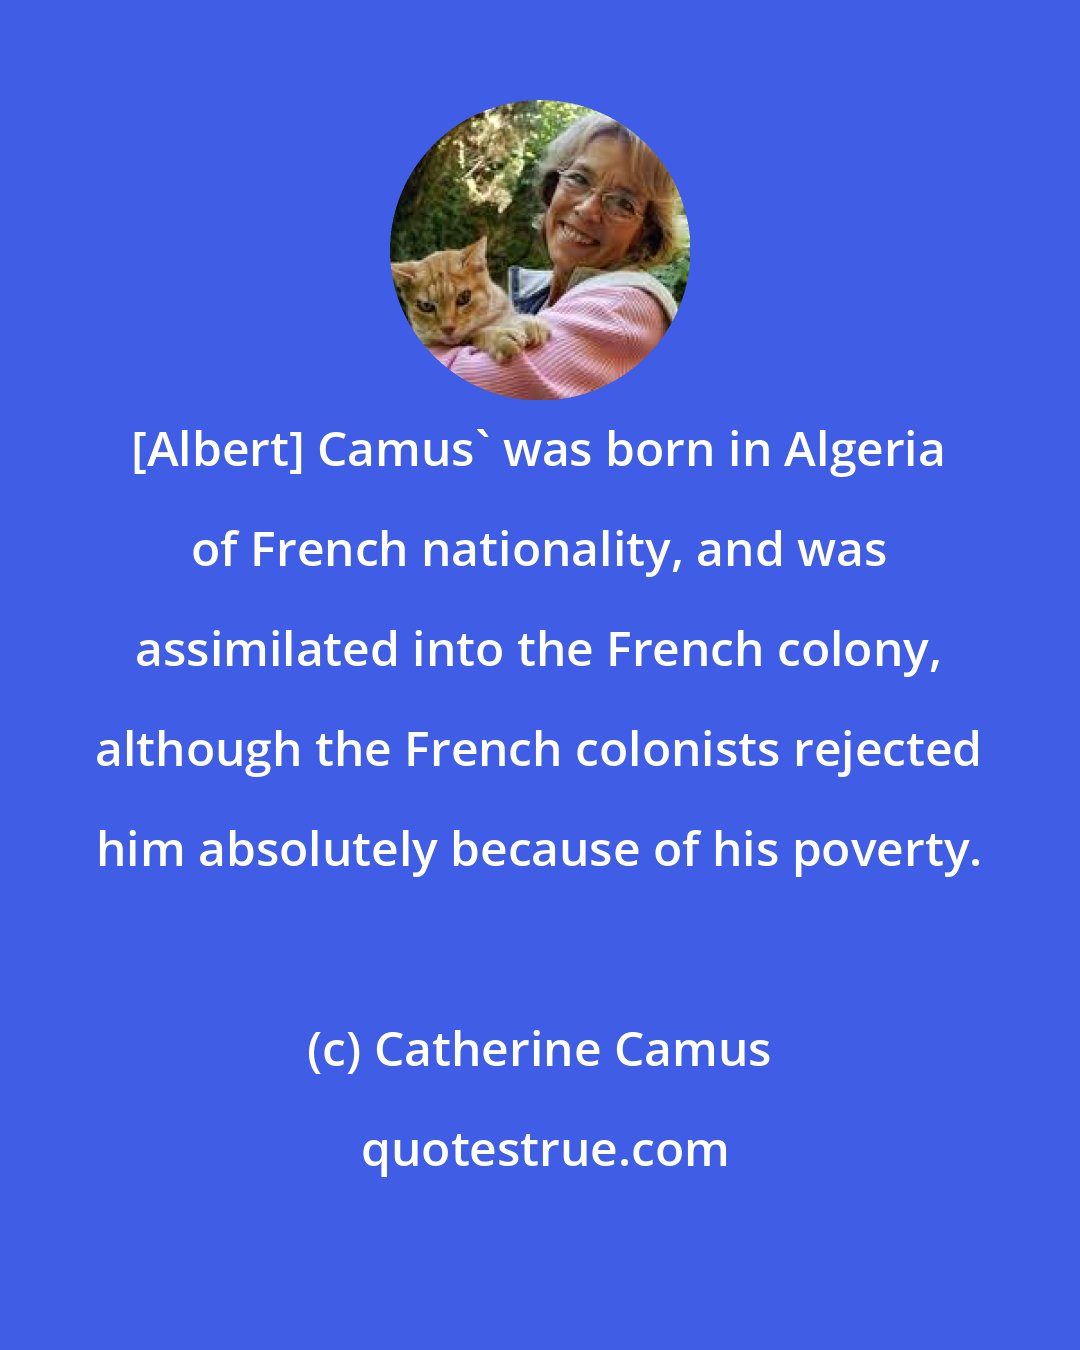 Catherine Camus: [Albert] Camus' was born in Algeria of French nationality, and was assimilated into the French colony, although the French colonists rejected him absolutely because of his poverty.